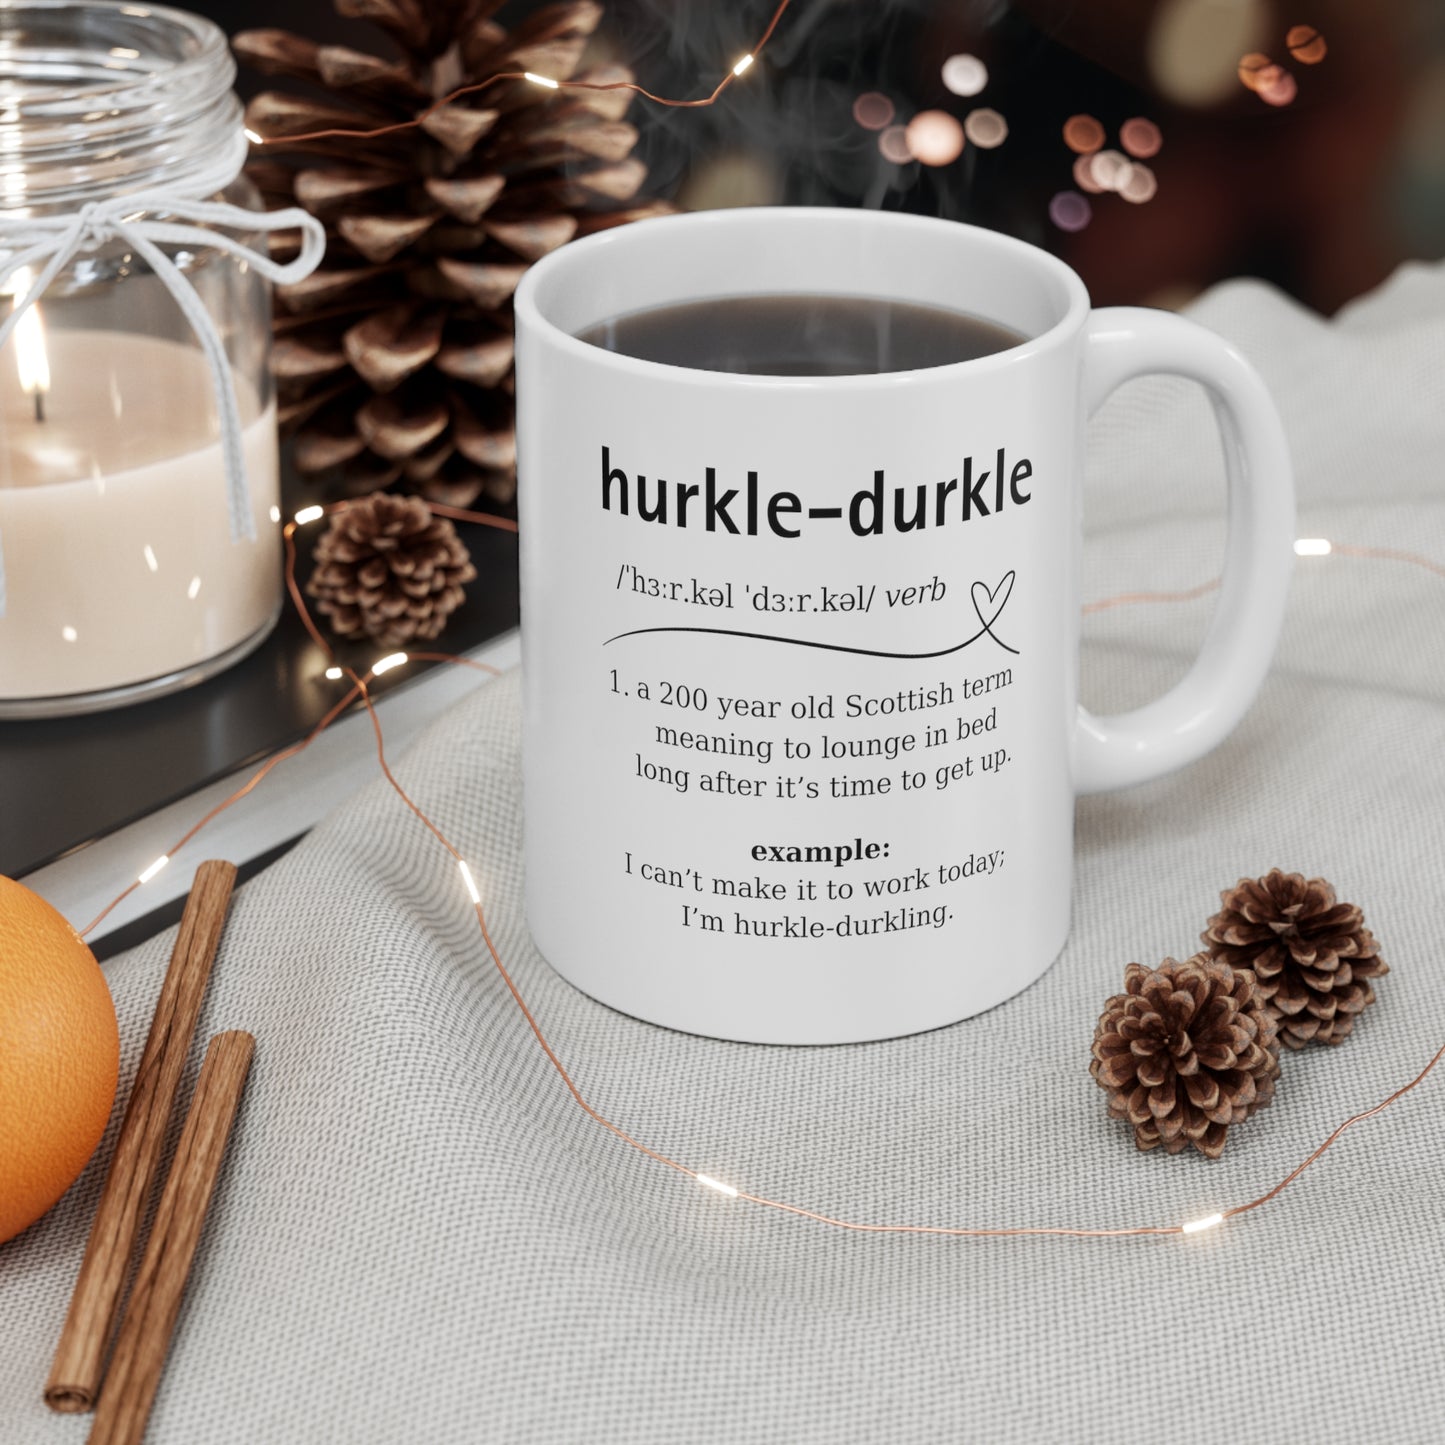 Hurkle-Durkle Meaning - Scottish ADHD Dictionary Definition Mug